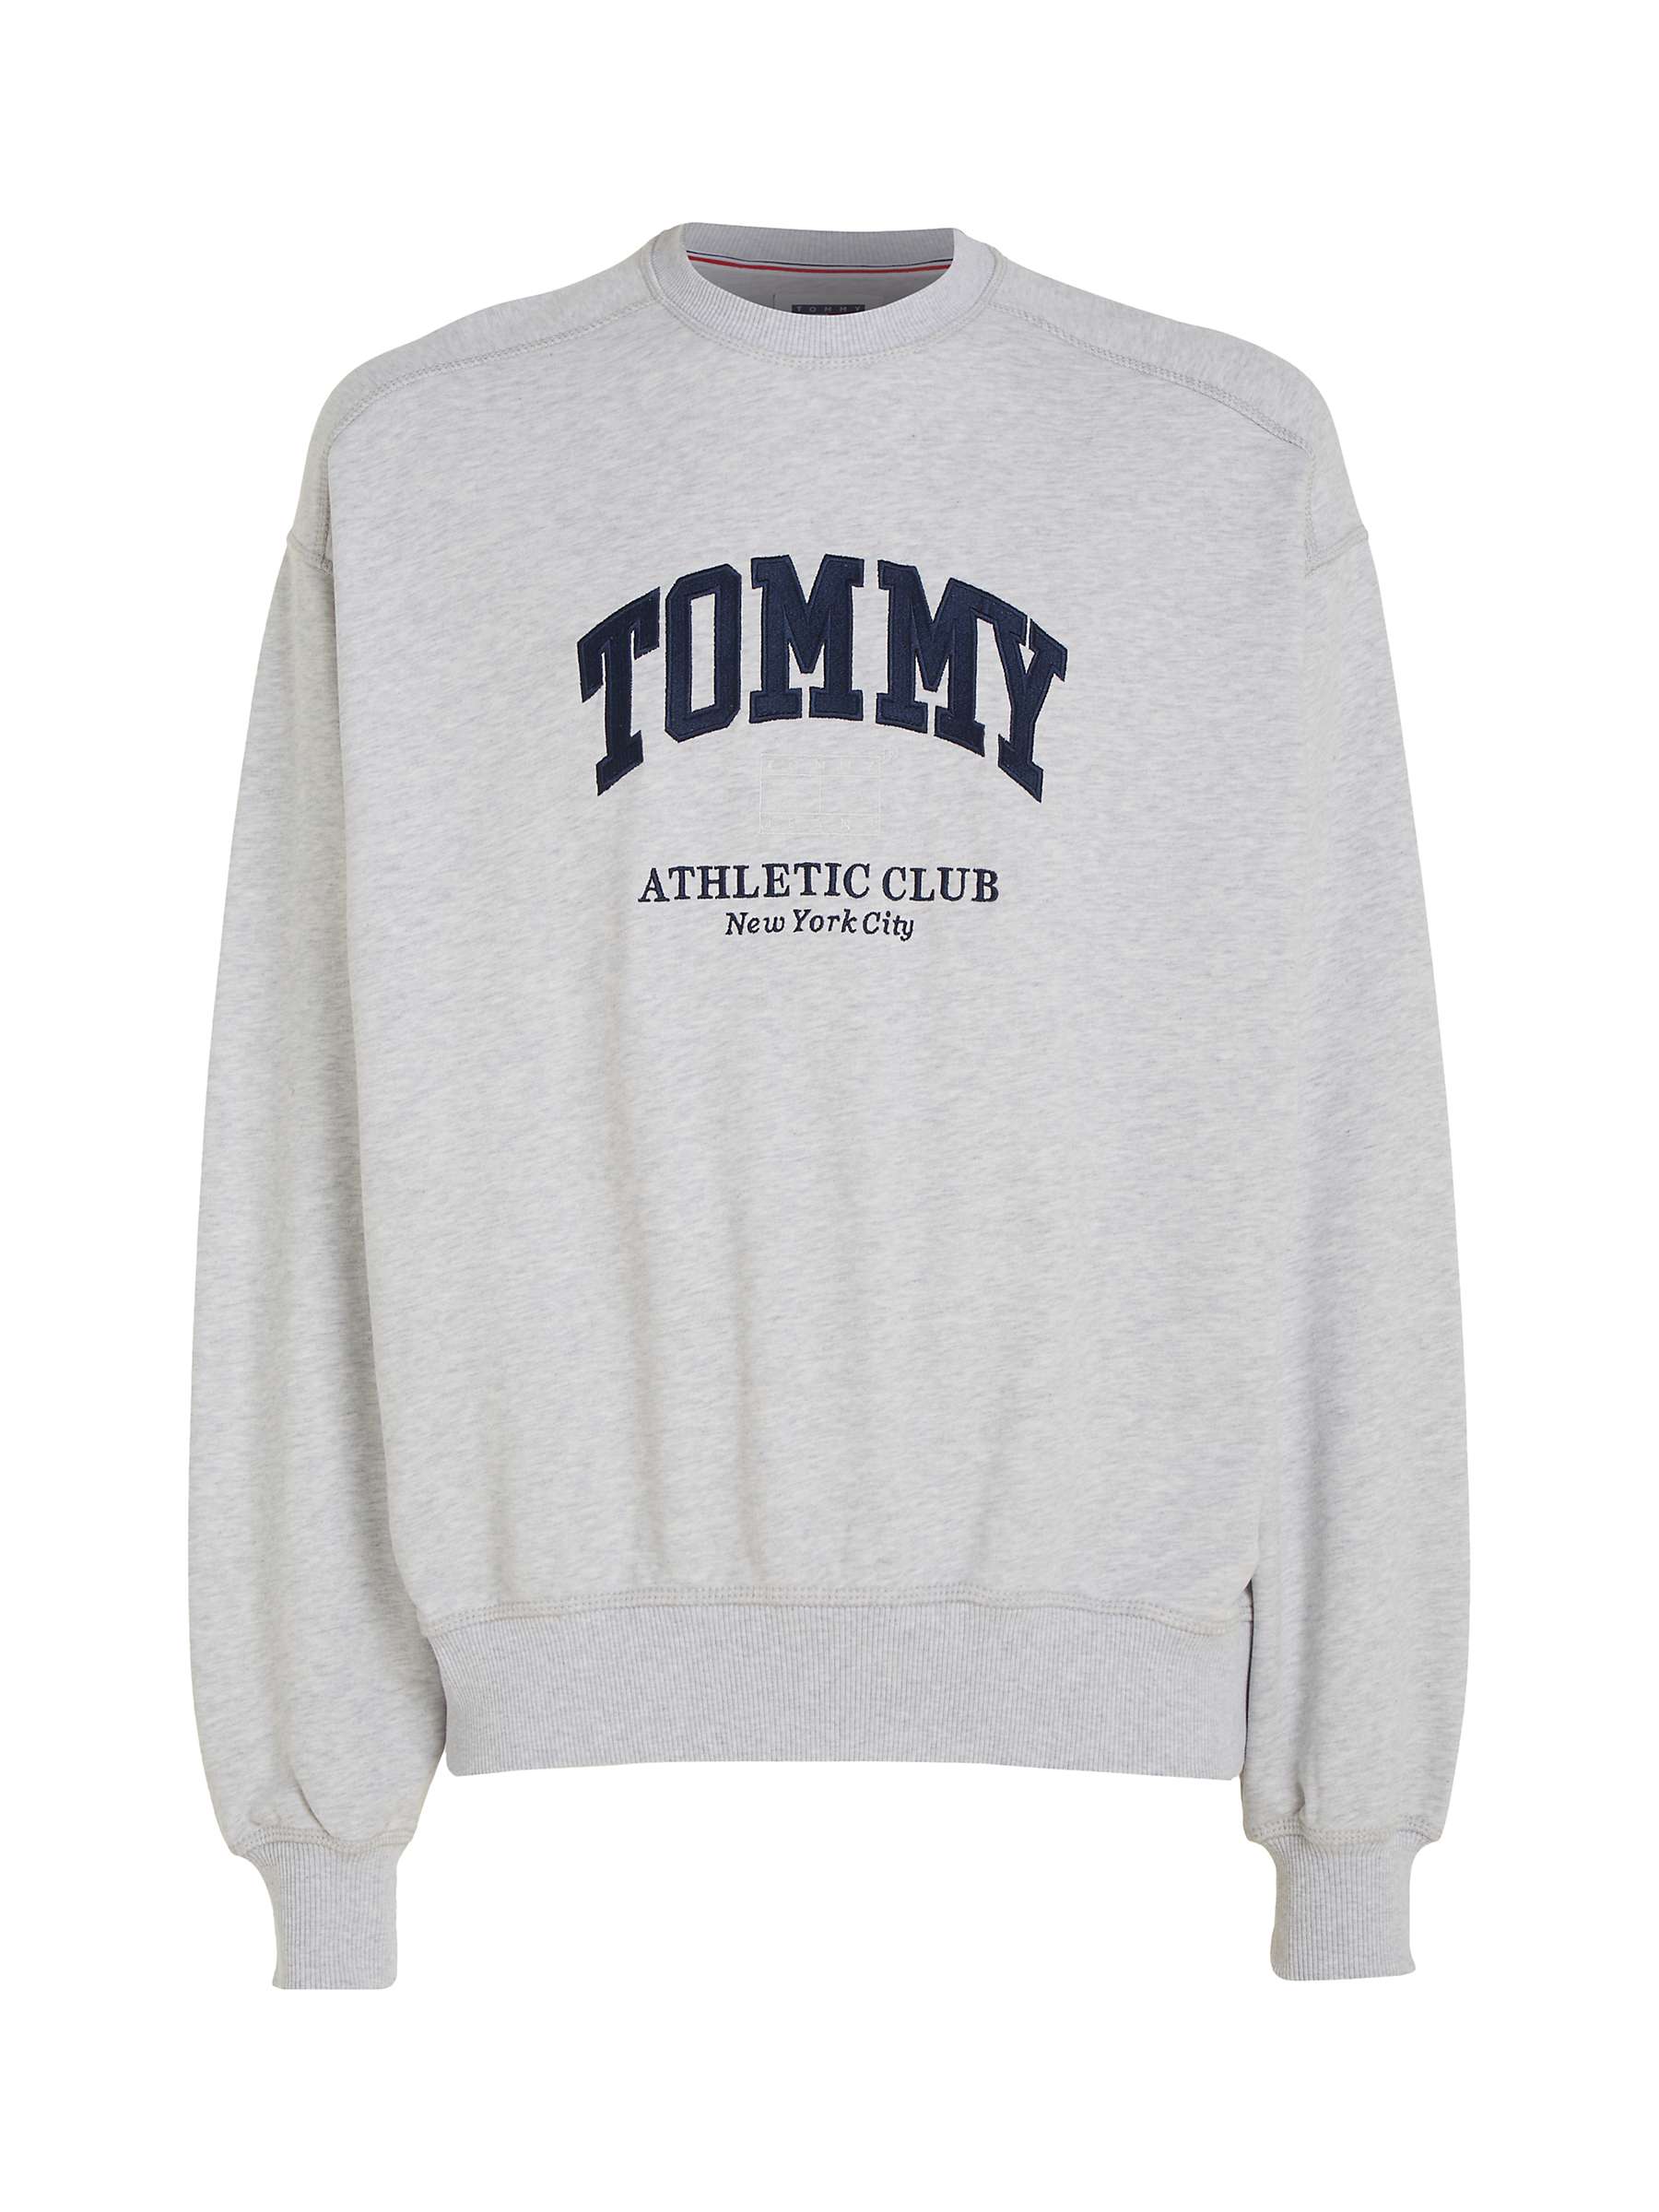 Buy Tommy Jeans Boxy Cotton Sweatshirt, Silver Grey Online at johnlewis.com